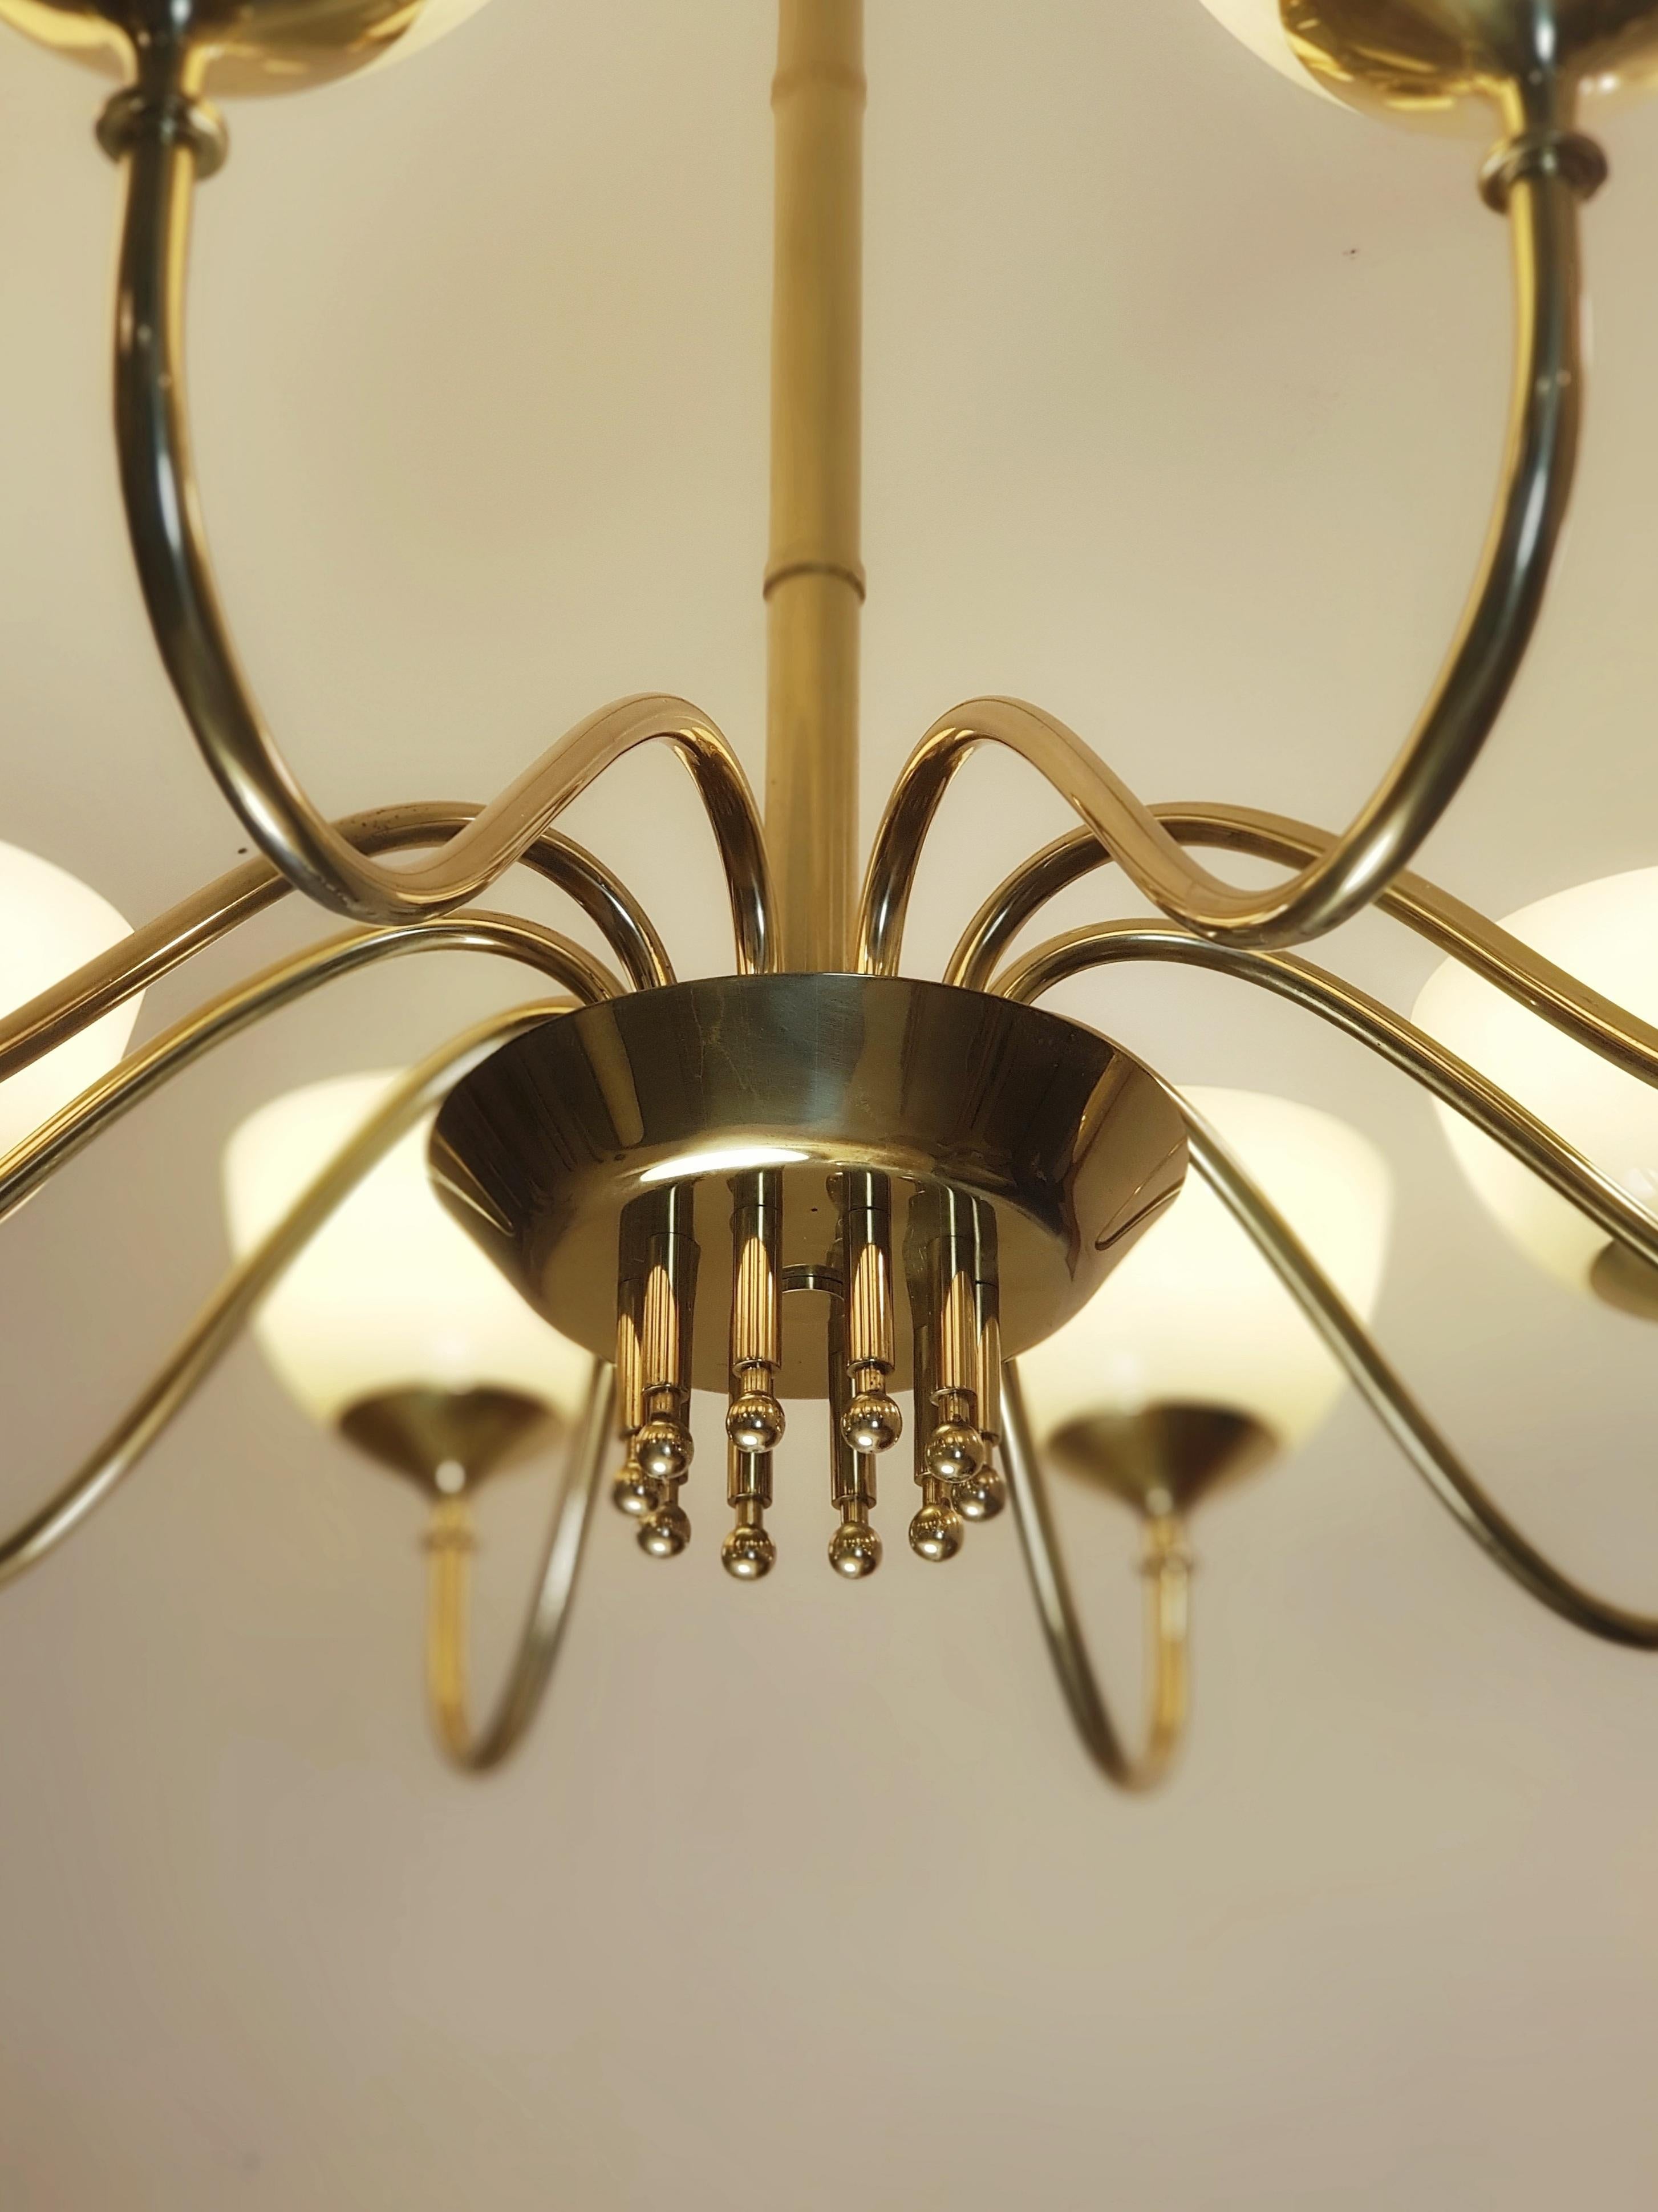 Monumental Paavo Tynell chandelier, Oy Taito Ab, 1952.

One of only two commissioned for the Executive's boardroom of the Finnish giant UPM headquarters in Valkeakoski. This lamp was made in 1952 and acquired directly from the space it hanged in